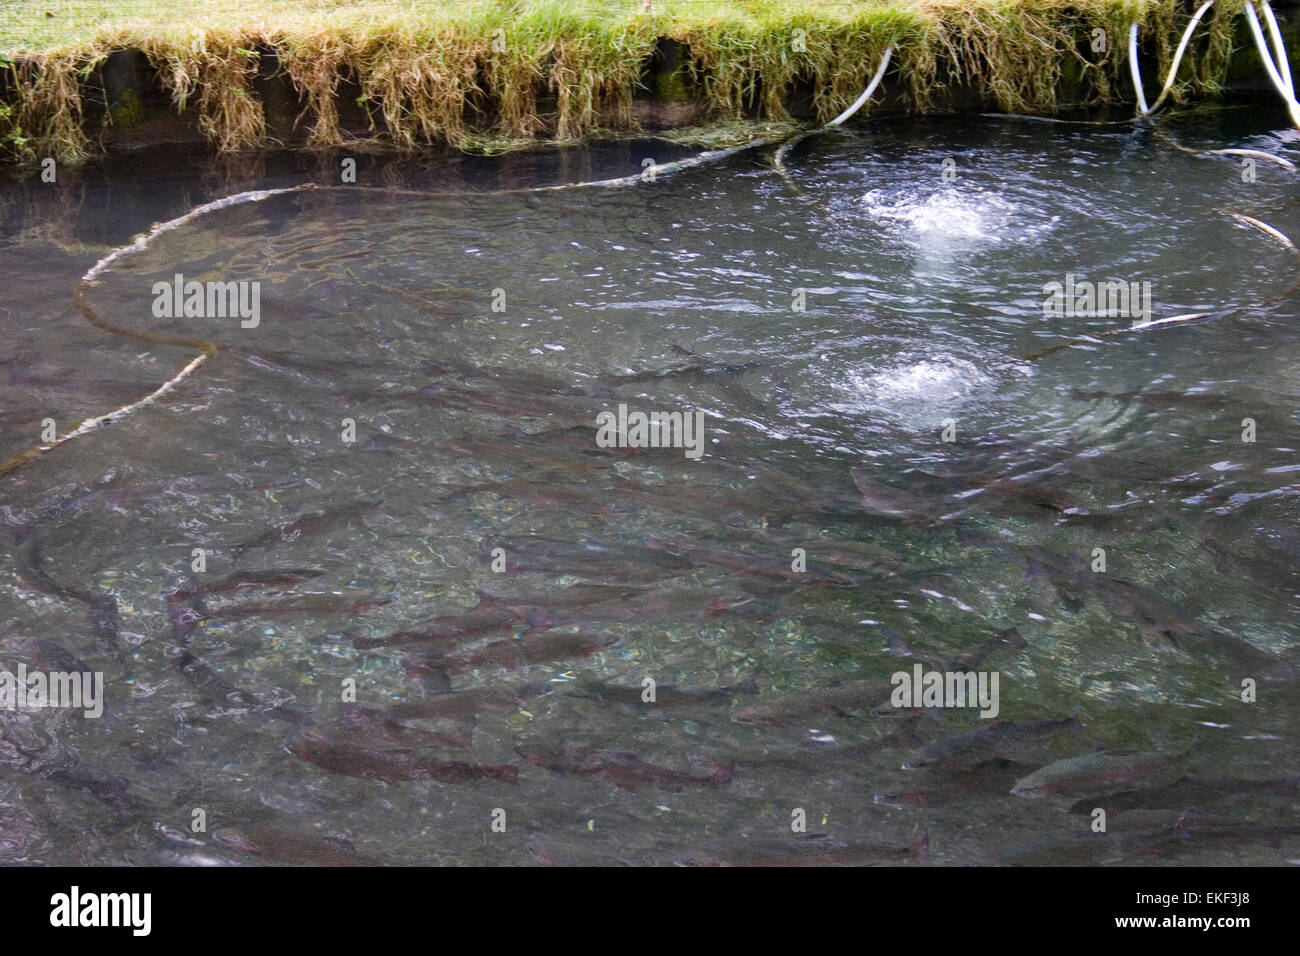 Live trout stock pond swimming breeding fishery Stock Photo